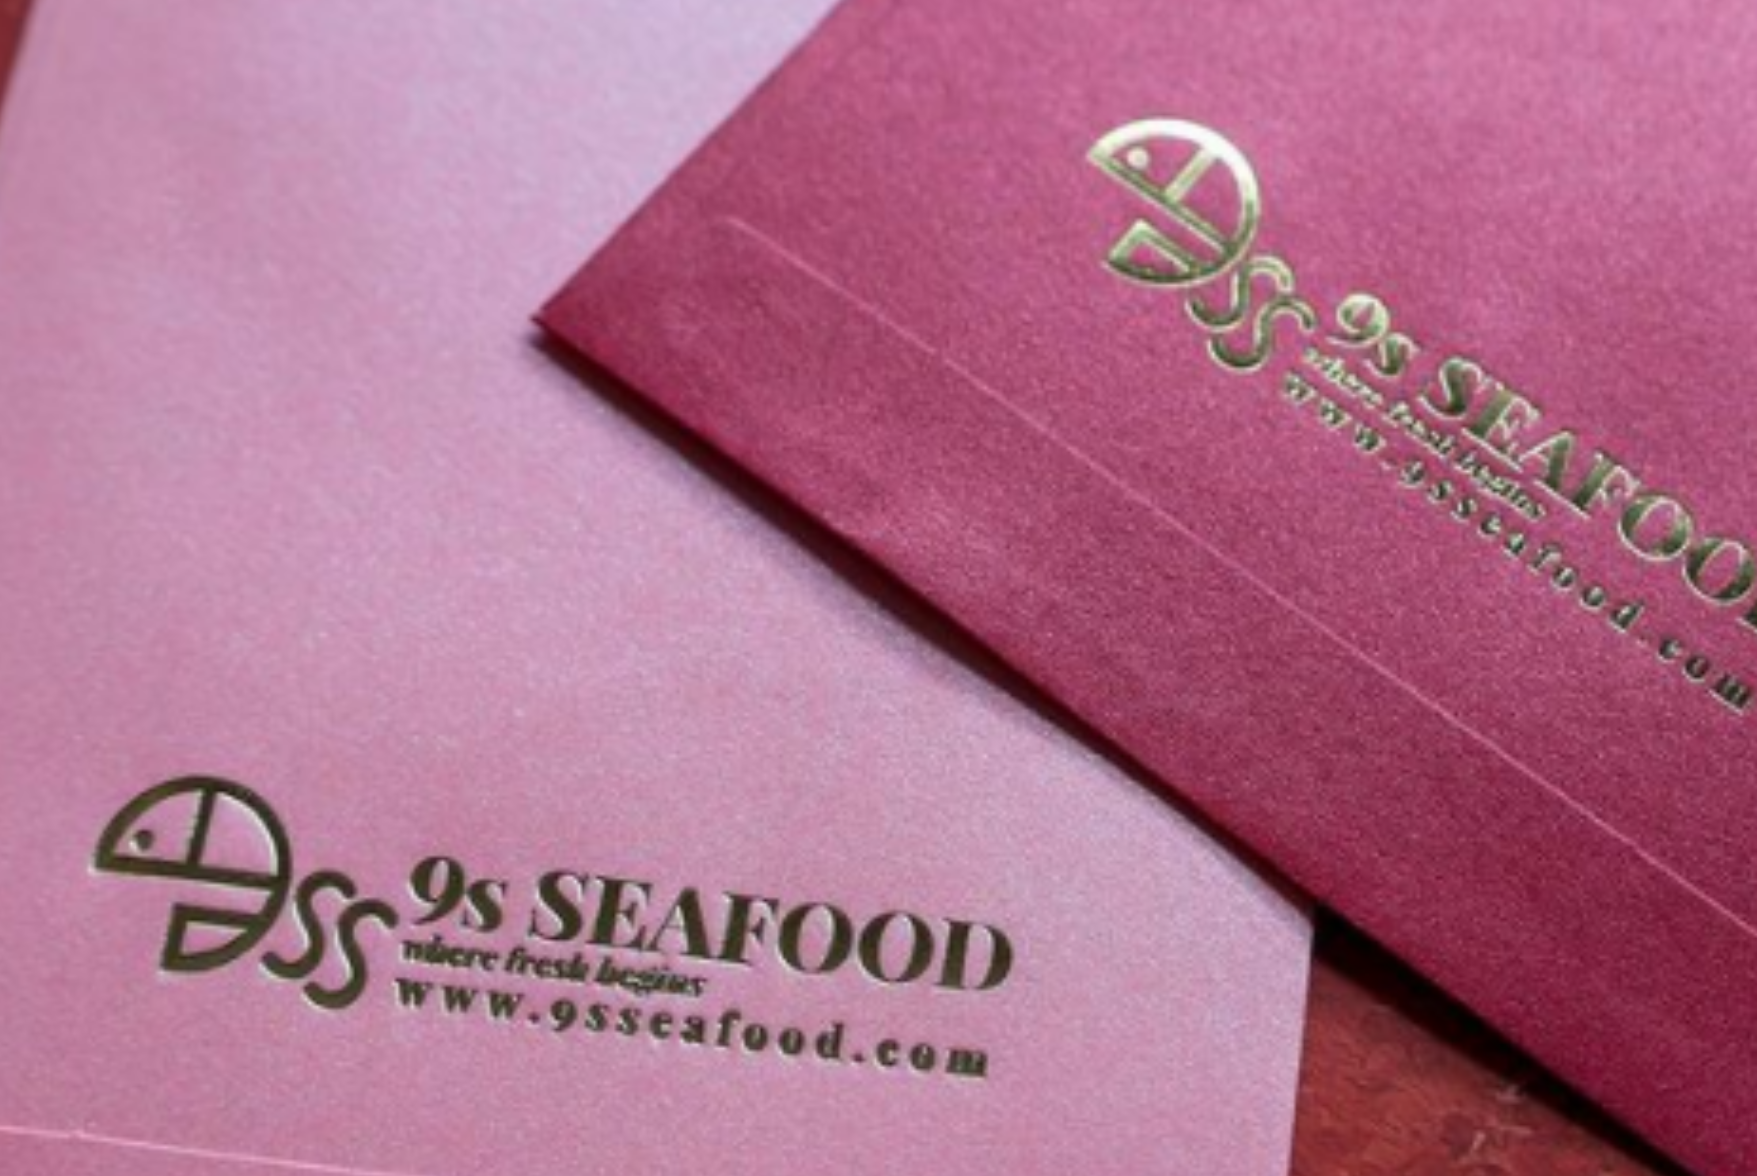 Red packets with the 9s Seafood logo debossed on them